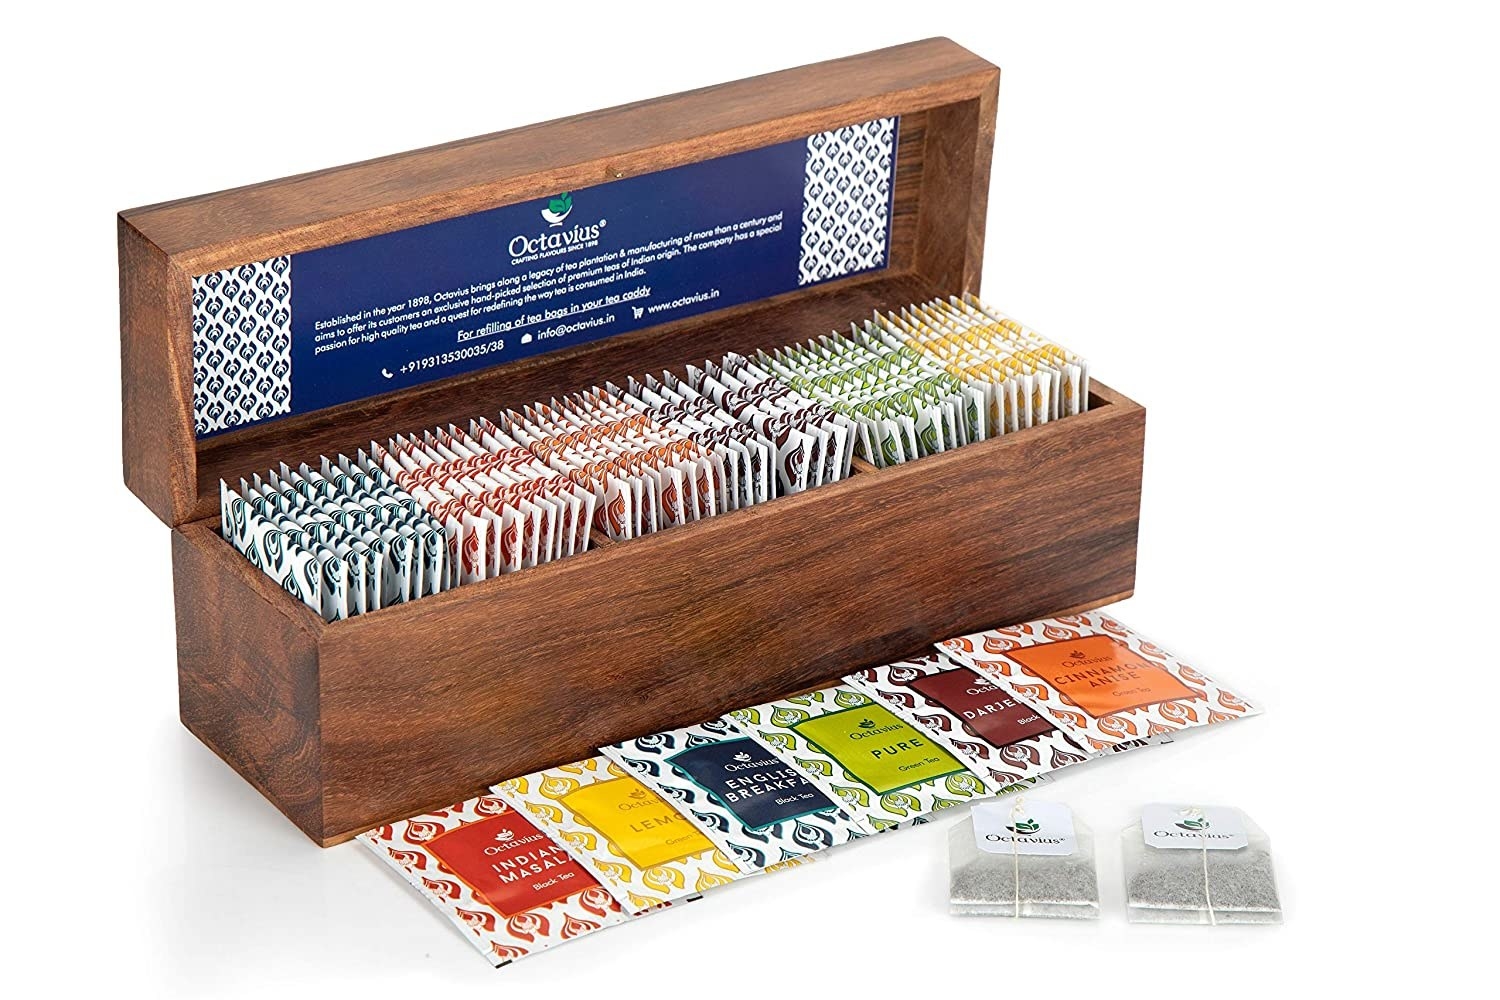 A wooden chest with different tea flavours